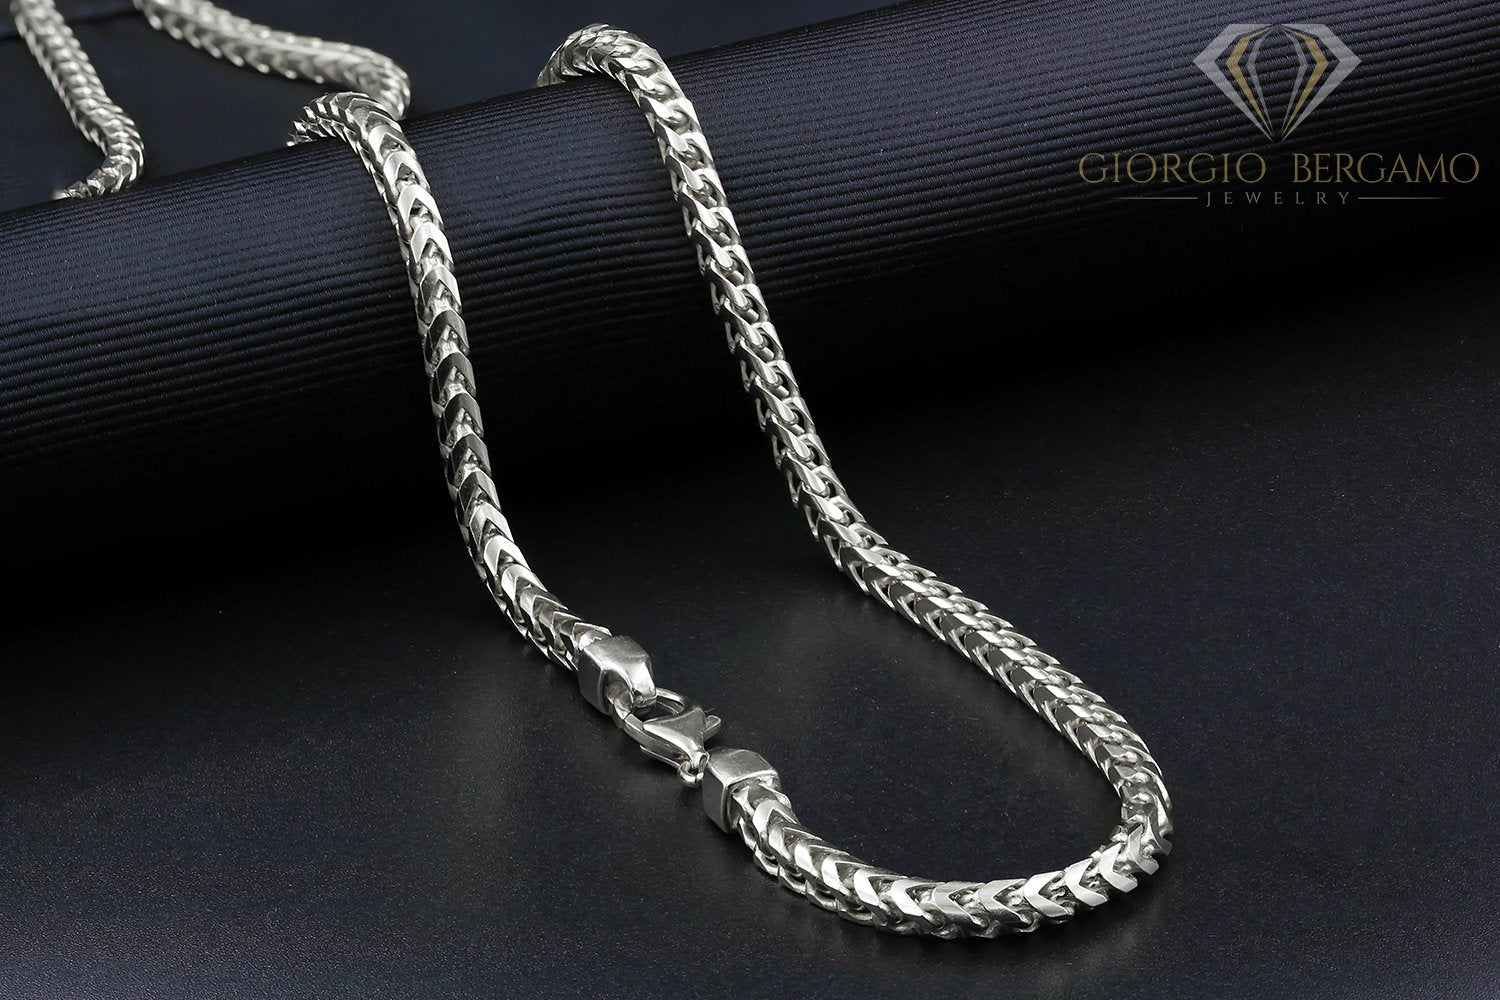 925 Sterling Silver 3.5mm Solid Franco Rhodium Chain